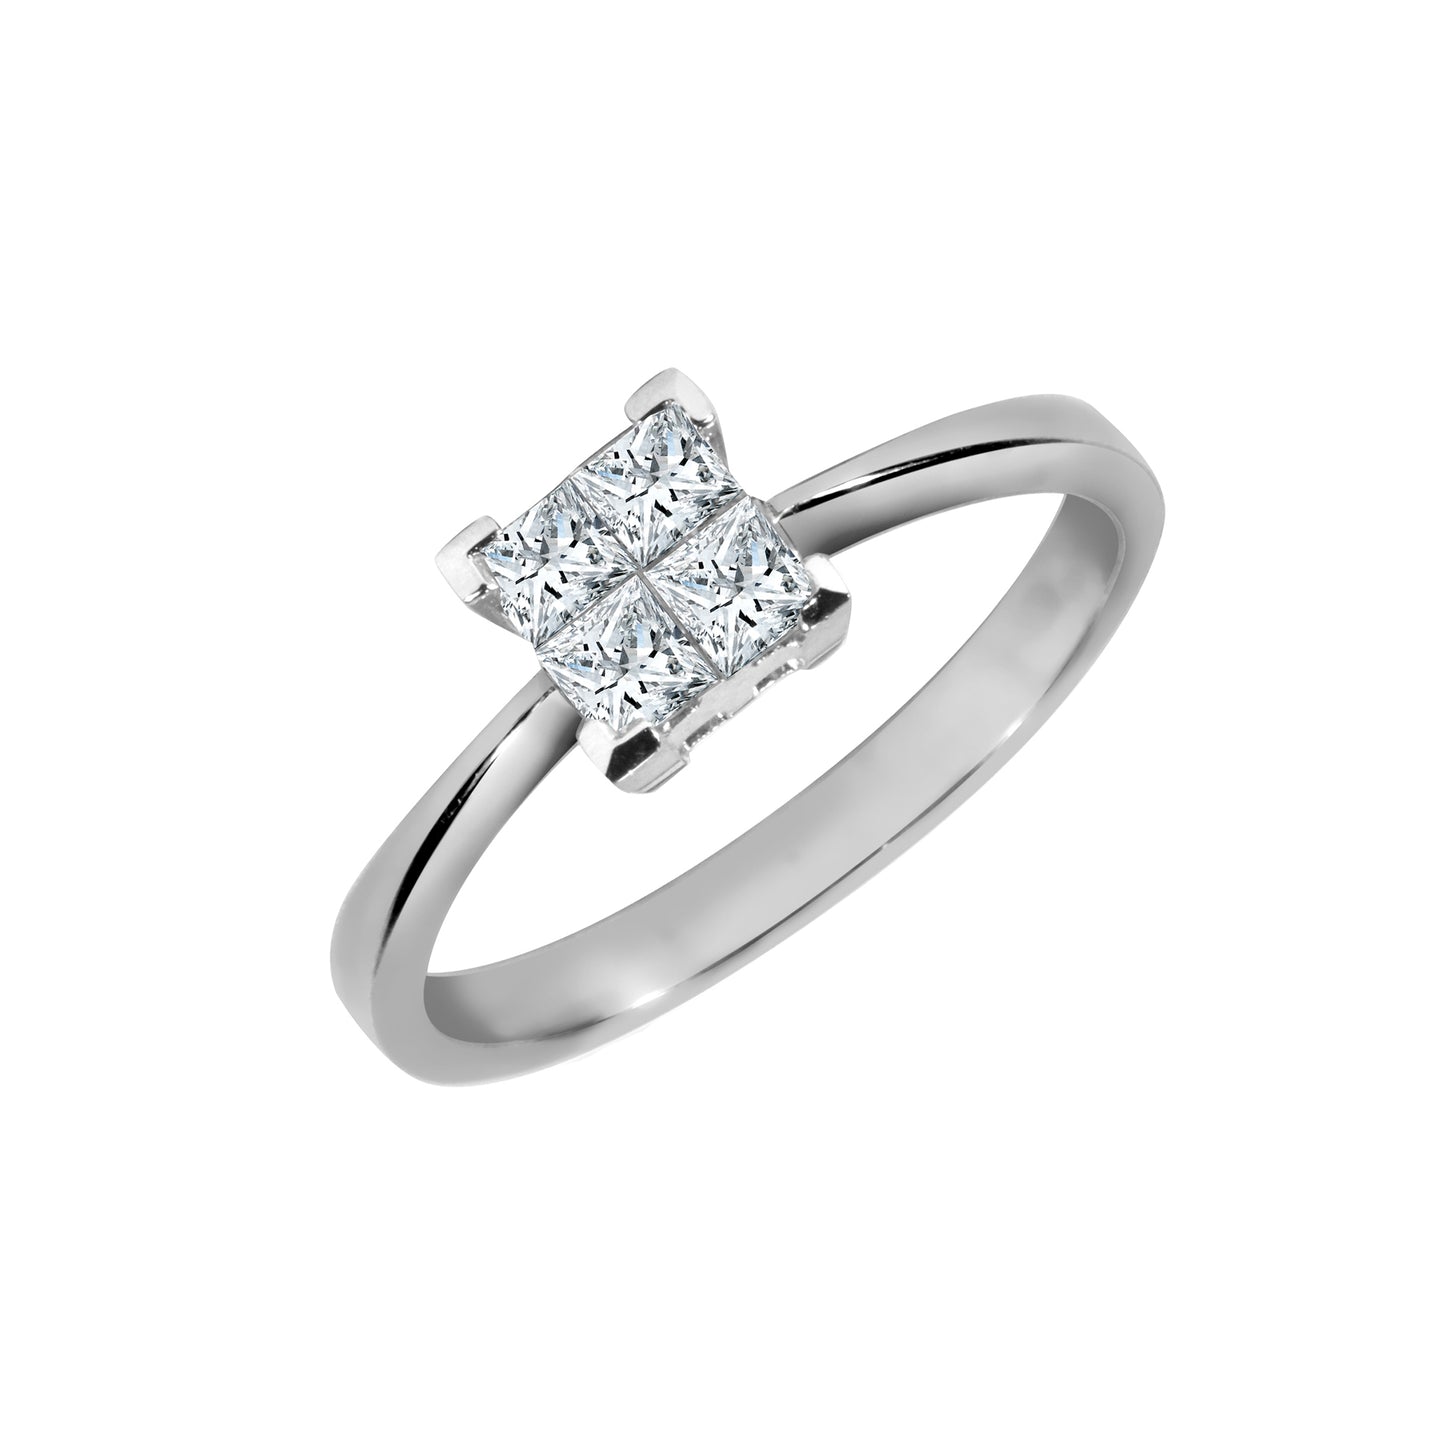 18ct White Gold  Diamond Illusion Solitaire Engagement Ring 5mm - 18R377-025